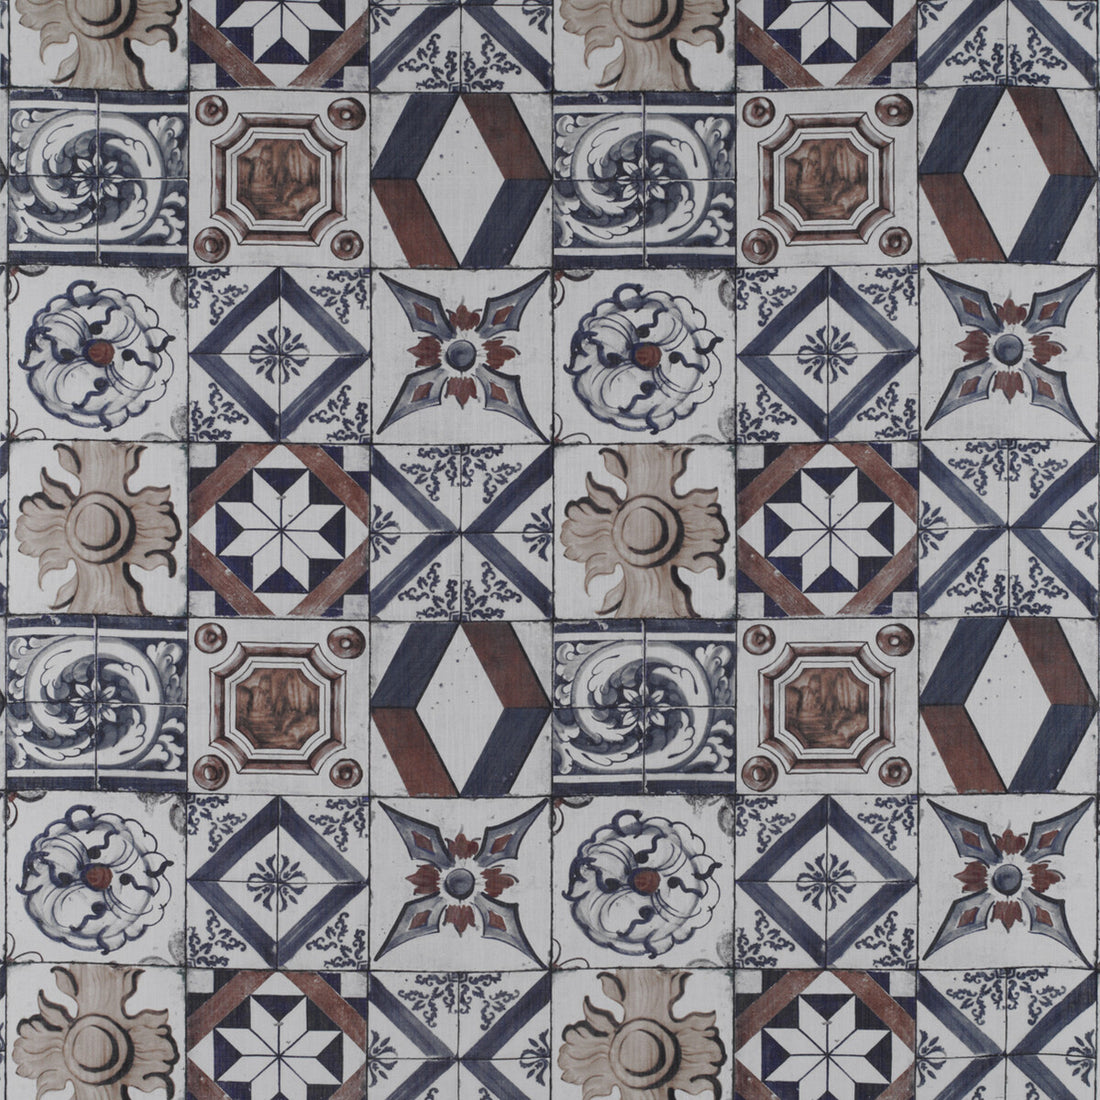 Trastevere fabric in azul/tabaco color - pattern GDT5332.002.0 - by Gaston y Daniela in the Tierras collection